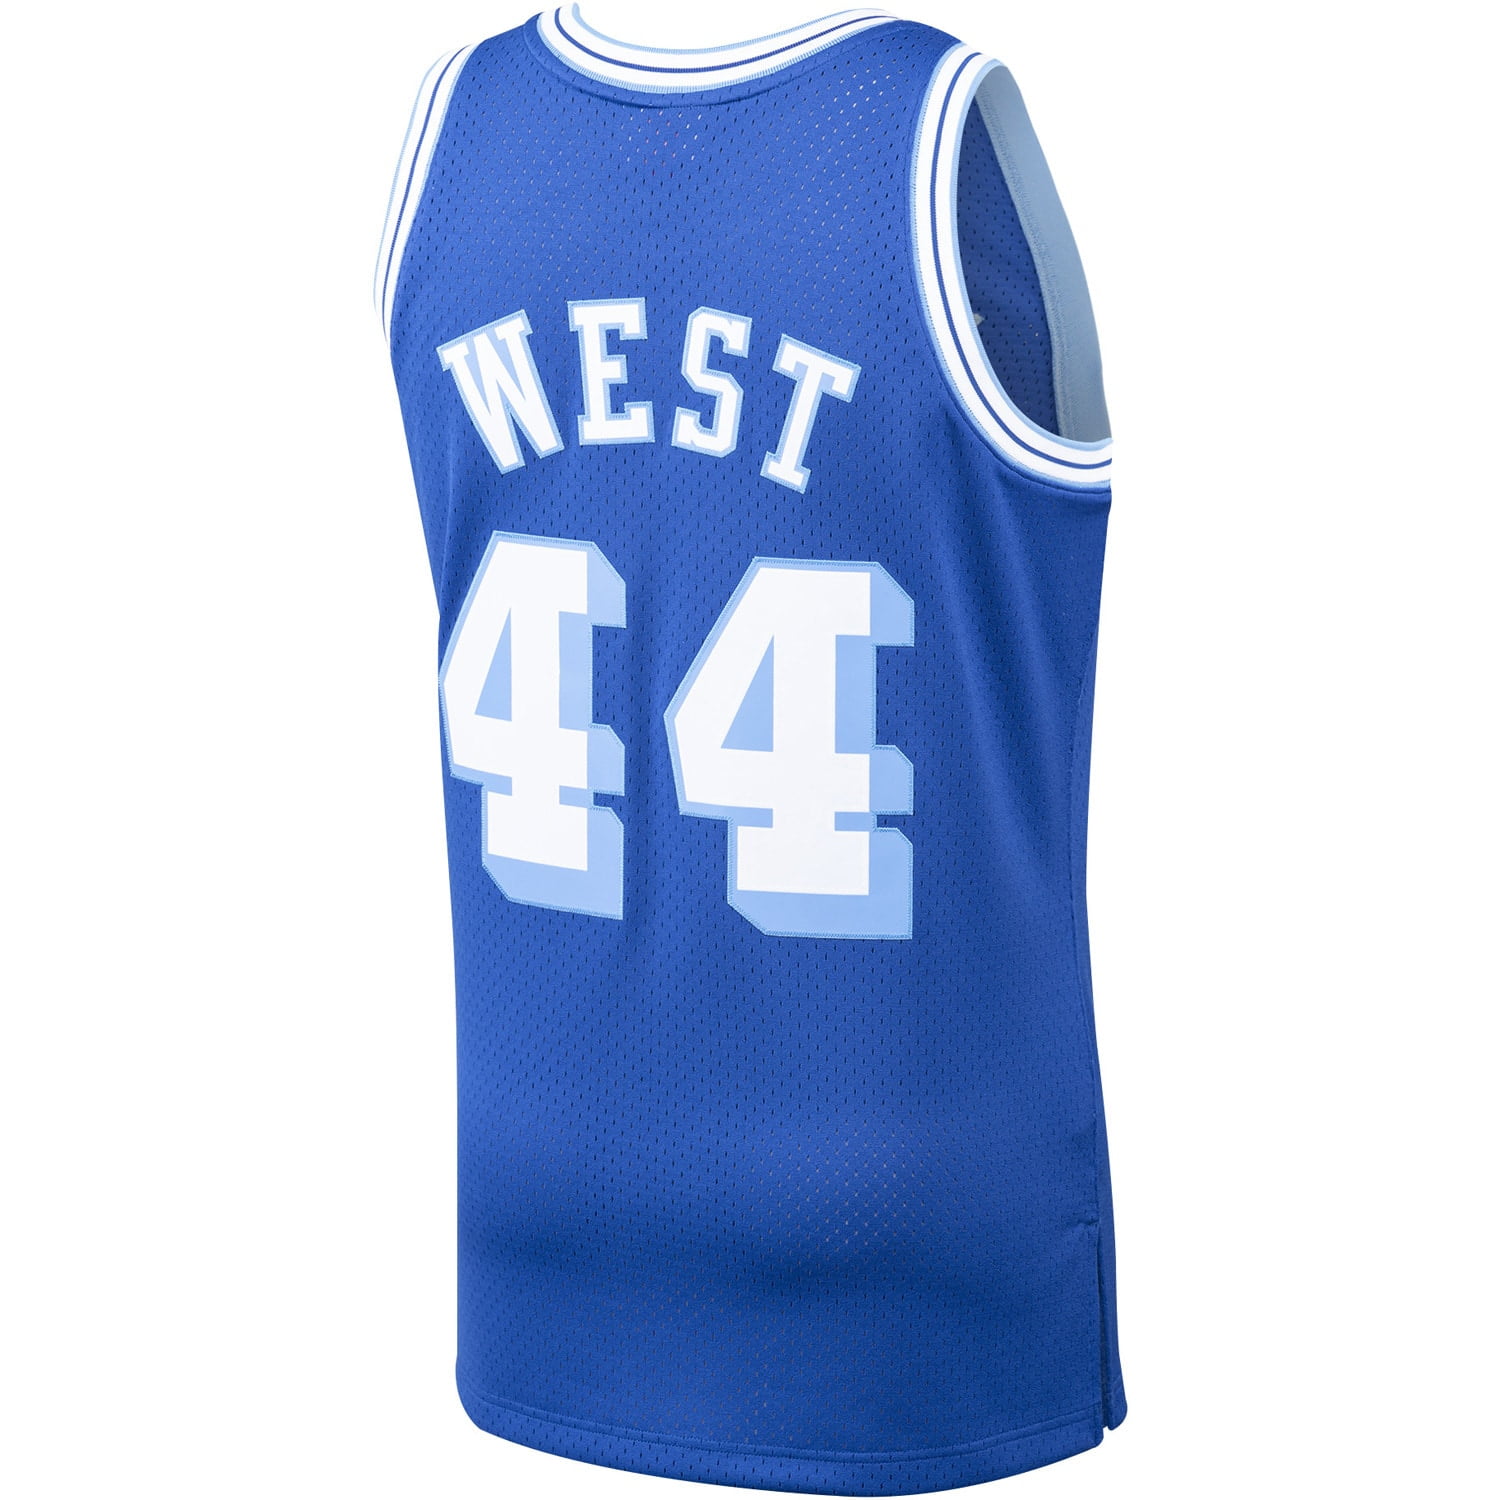 Jerry West Signed Los Angeles Throwback Blue Jersey